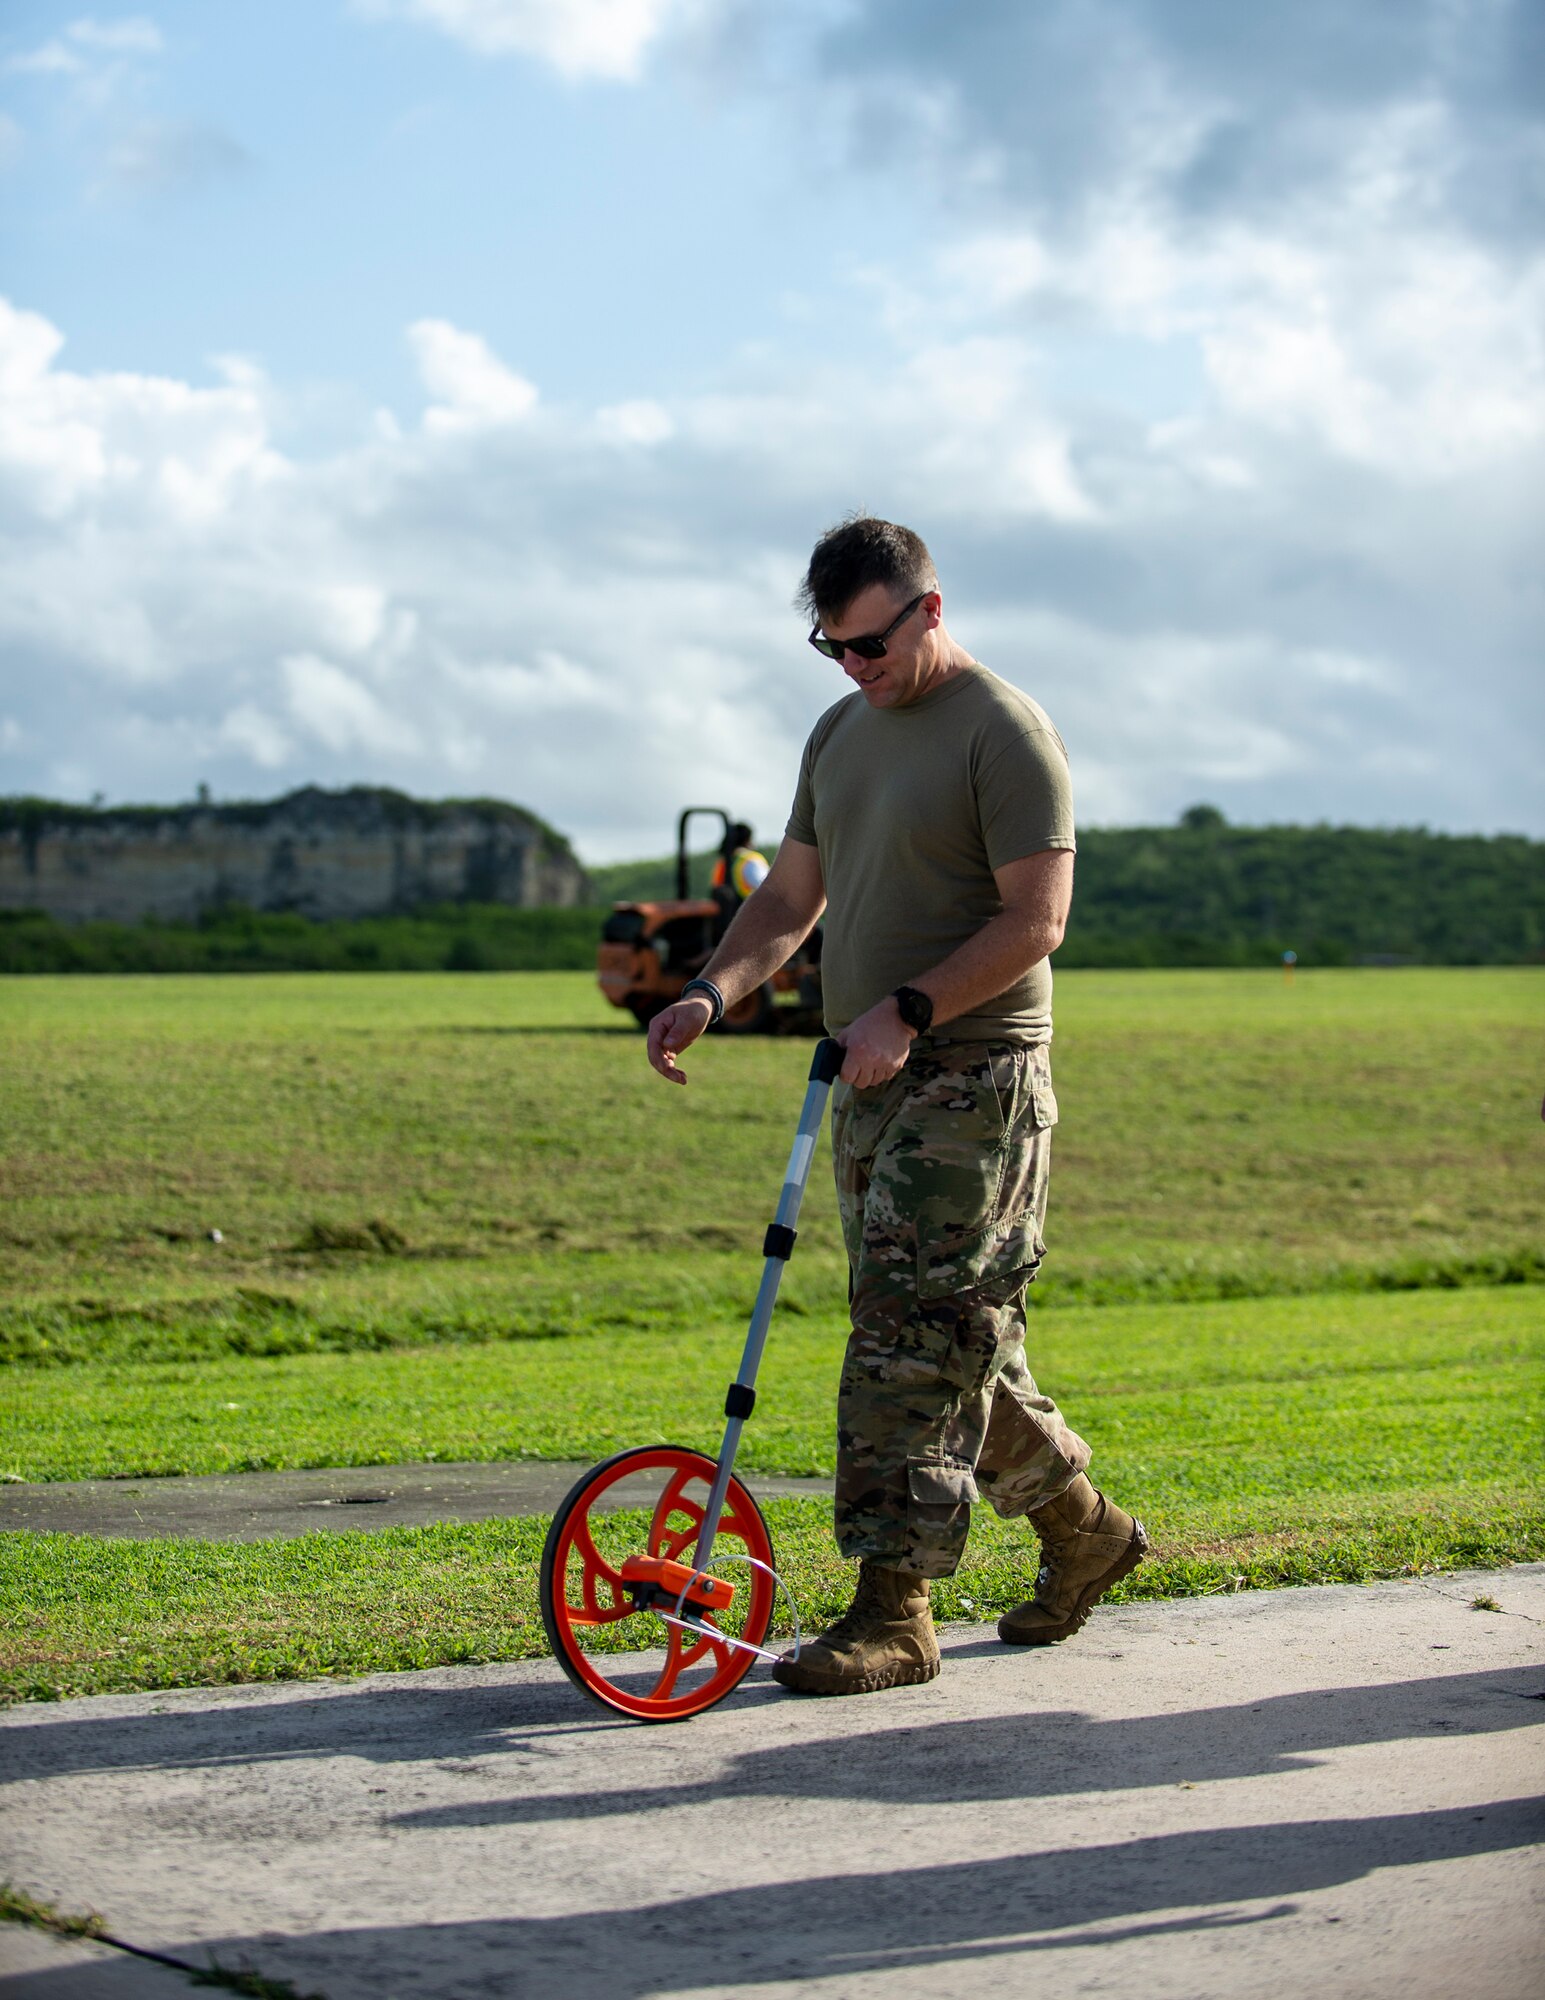 U.S. Air Force Tech. Sgt. Jeff Allen, 136th Contingency Response Flight, Texas Air National Guard, measures the width of a taxiway using a measuring wheel in St. Croix, Virgin Islands, Aug. 17, 2021.